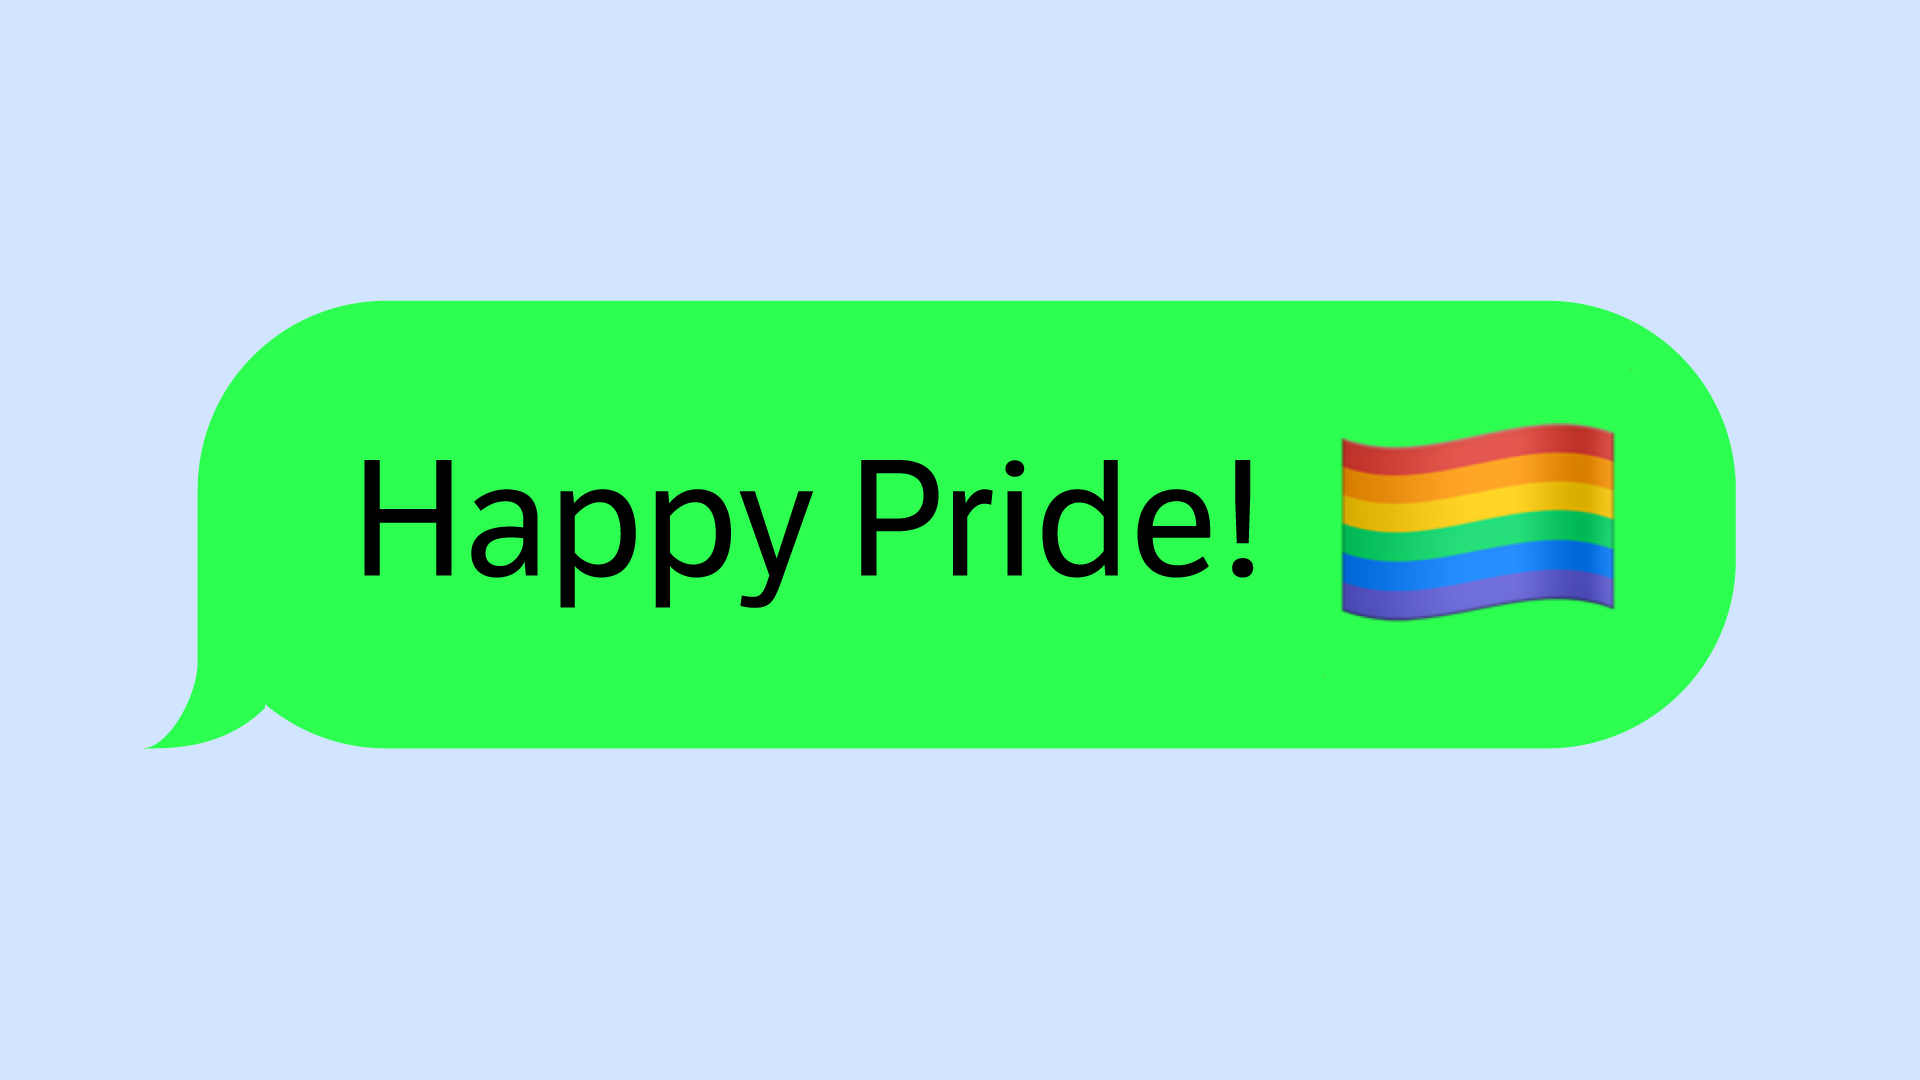 What's The Story Behind The 🏳️‍🌈 Rainbow Flag Emoji?